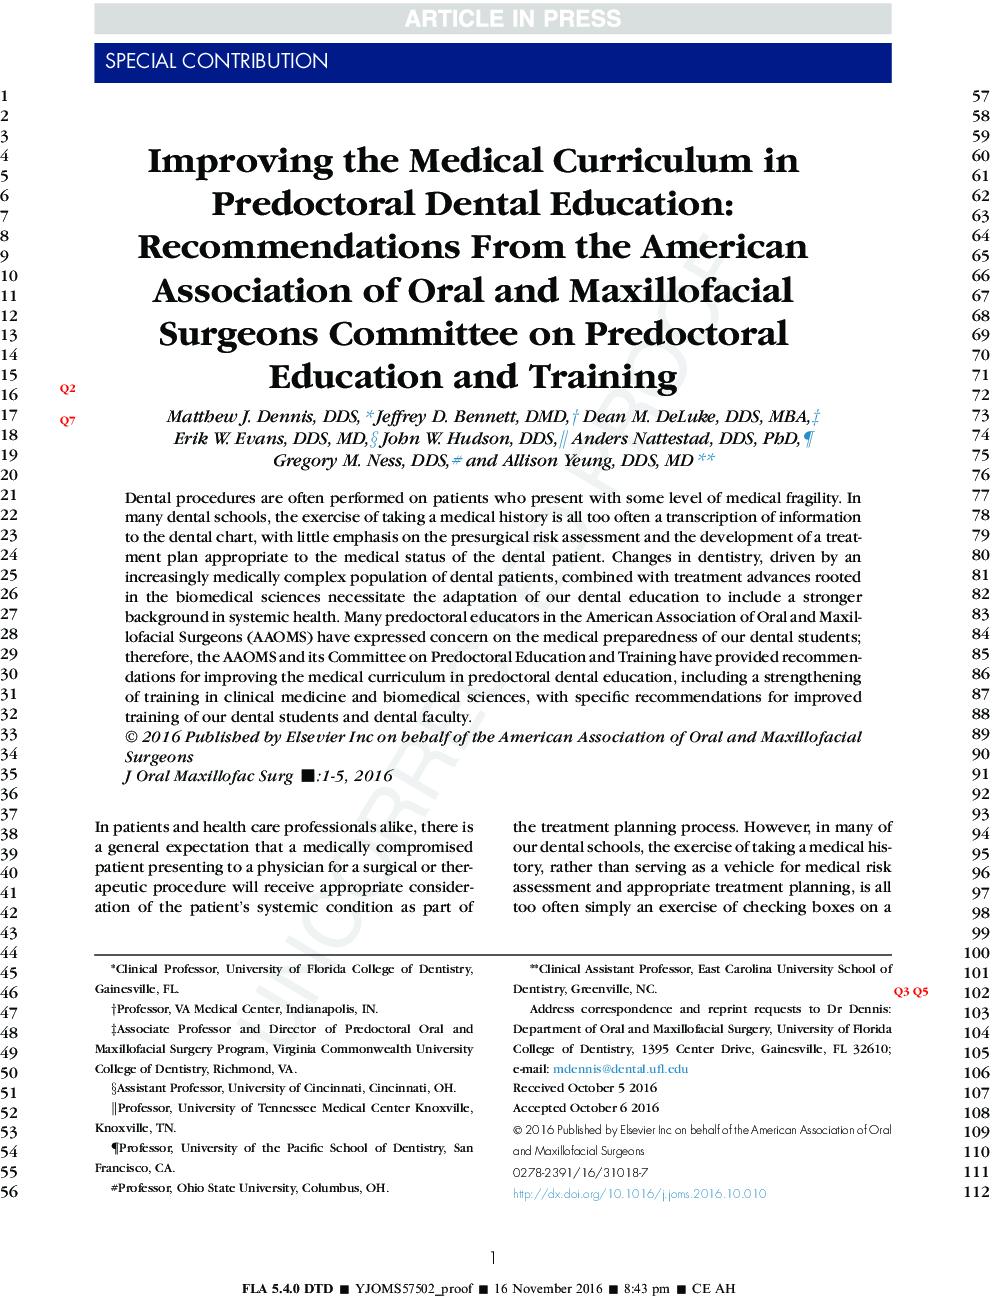 Improving the Medical Curriculum in Predoctoral Dental Education: Recommendations From the American Association of Oral and Maxillofacial Surgeons Committee on Predoctoral Education and Training